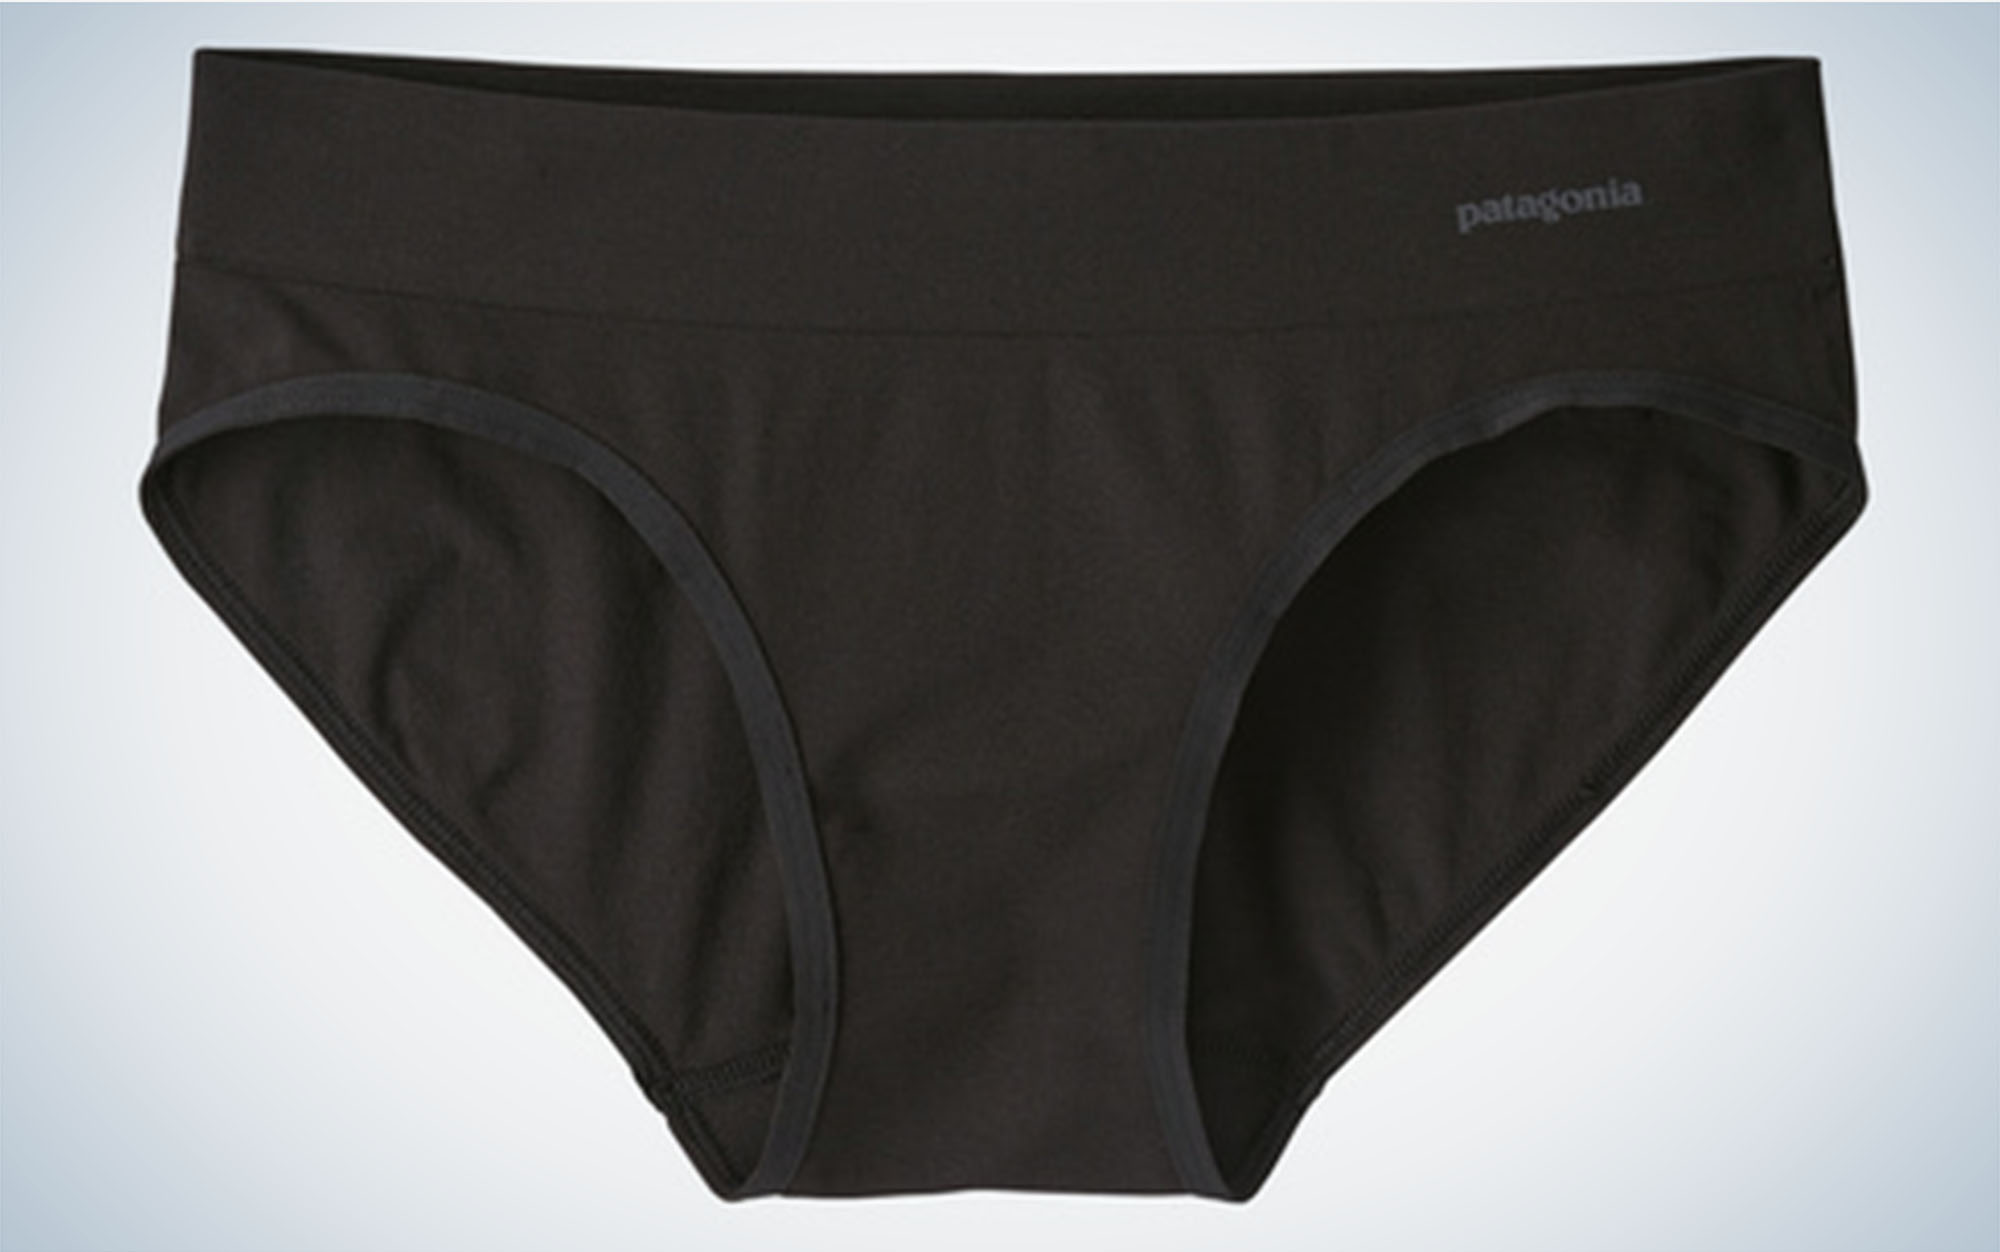 Say Goodbye To Swamp Crotch: Good Hiking Underwear For Women *GUIDE